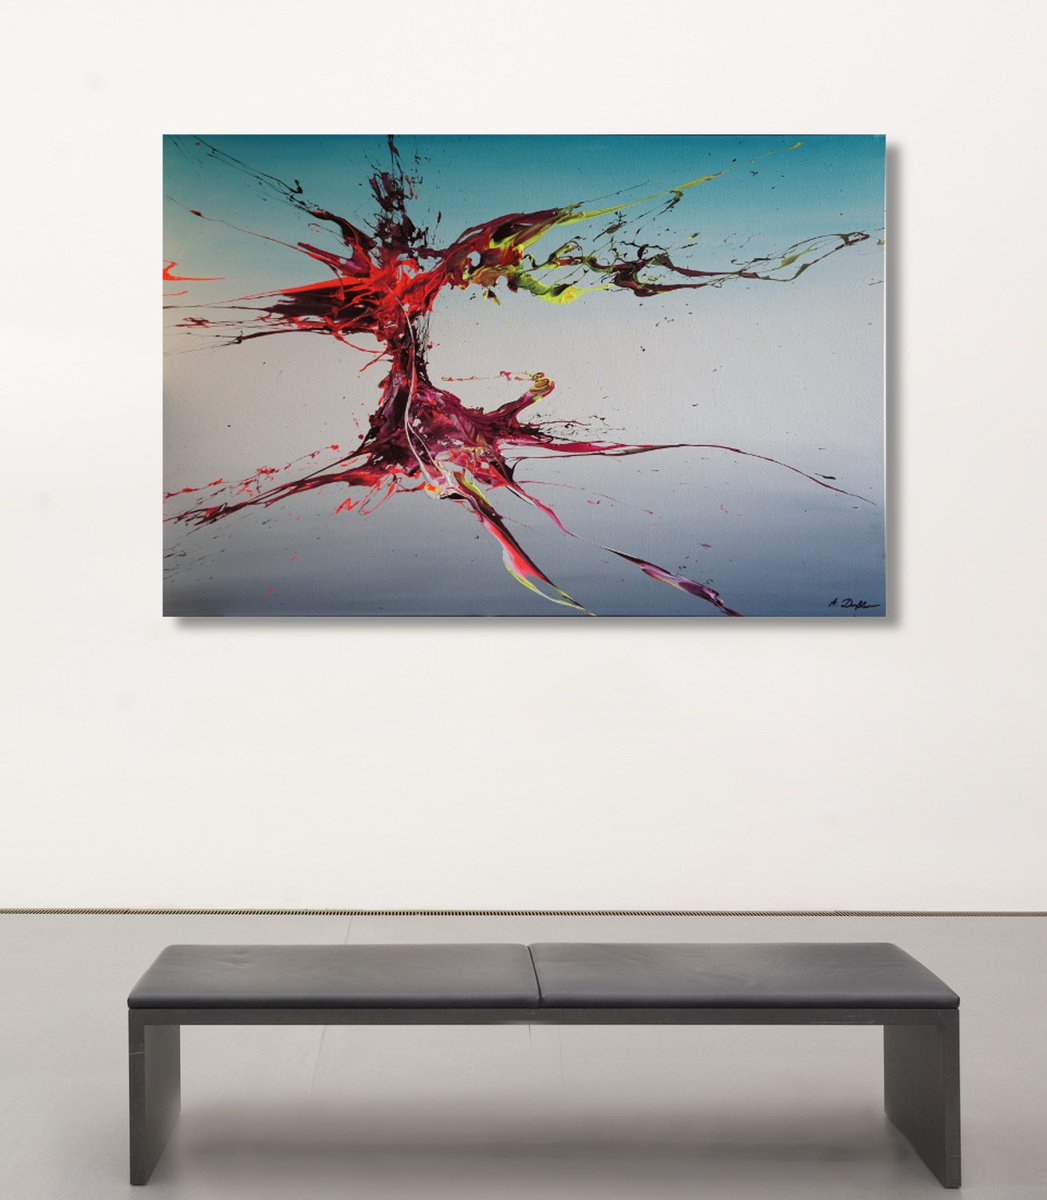 Roots to Crown (Spirits Of Skies 096118) - 120 x 80 cm - XXL (48 x 32 inches) by Ansgar Dressler